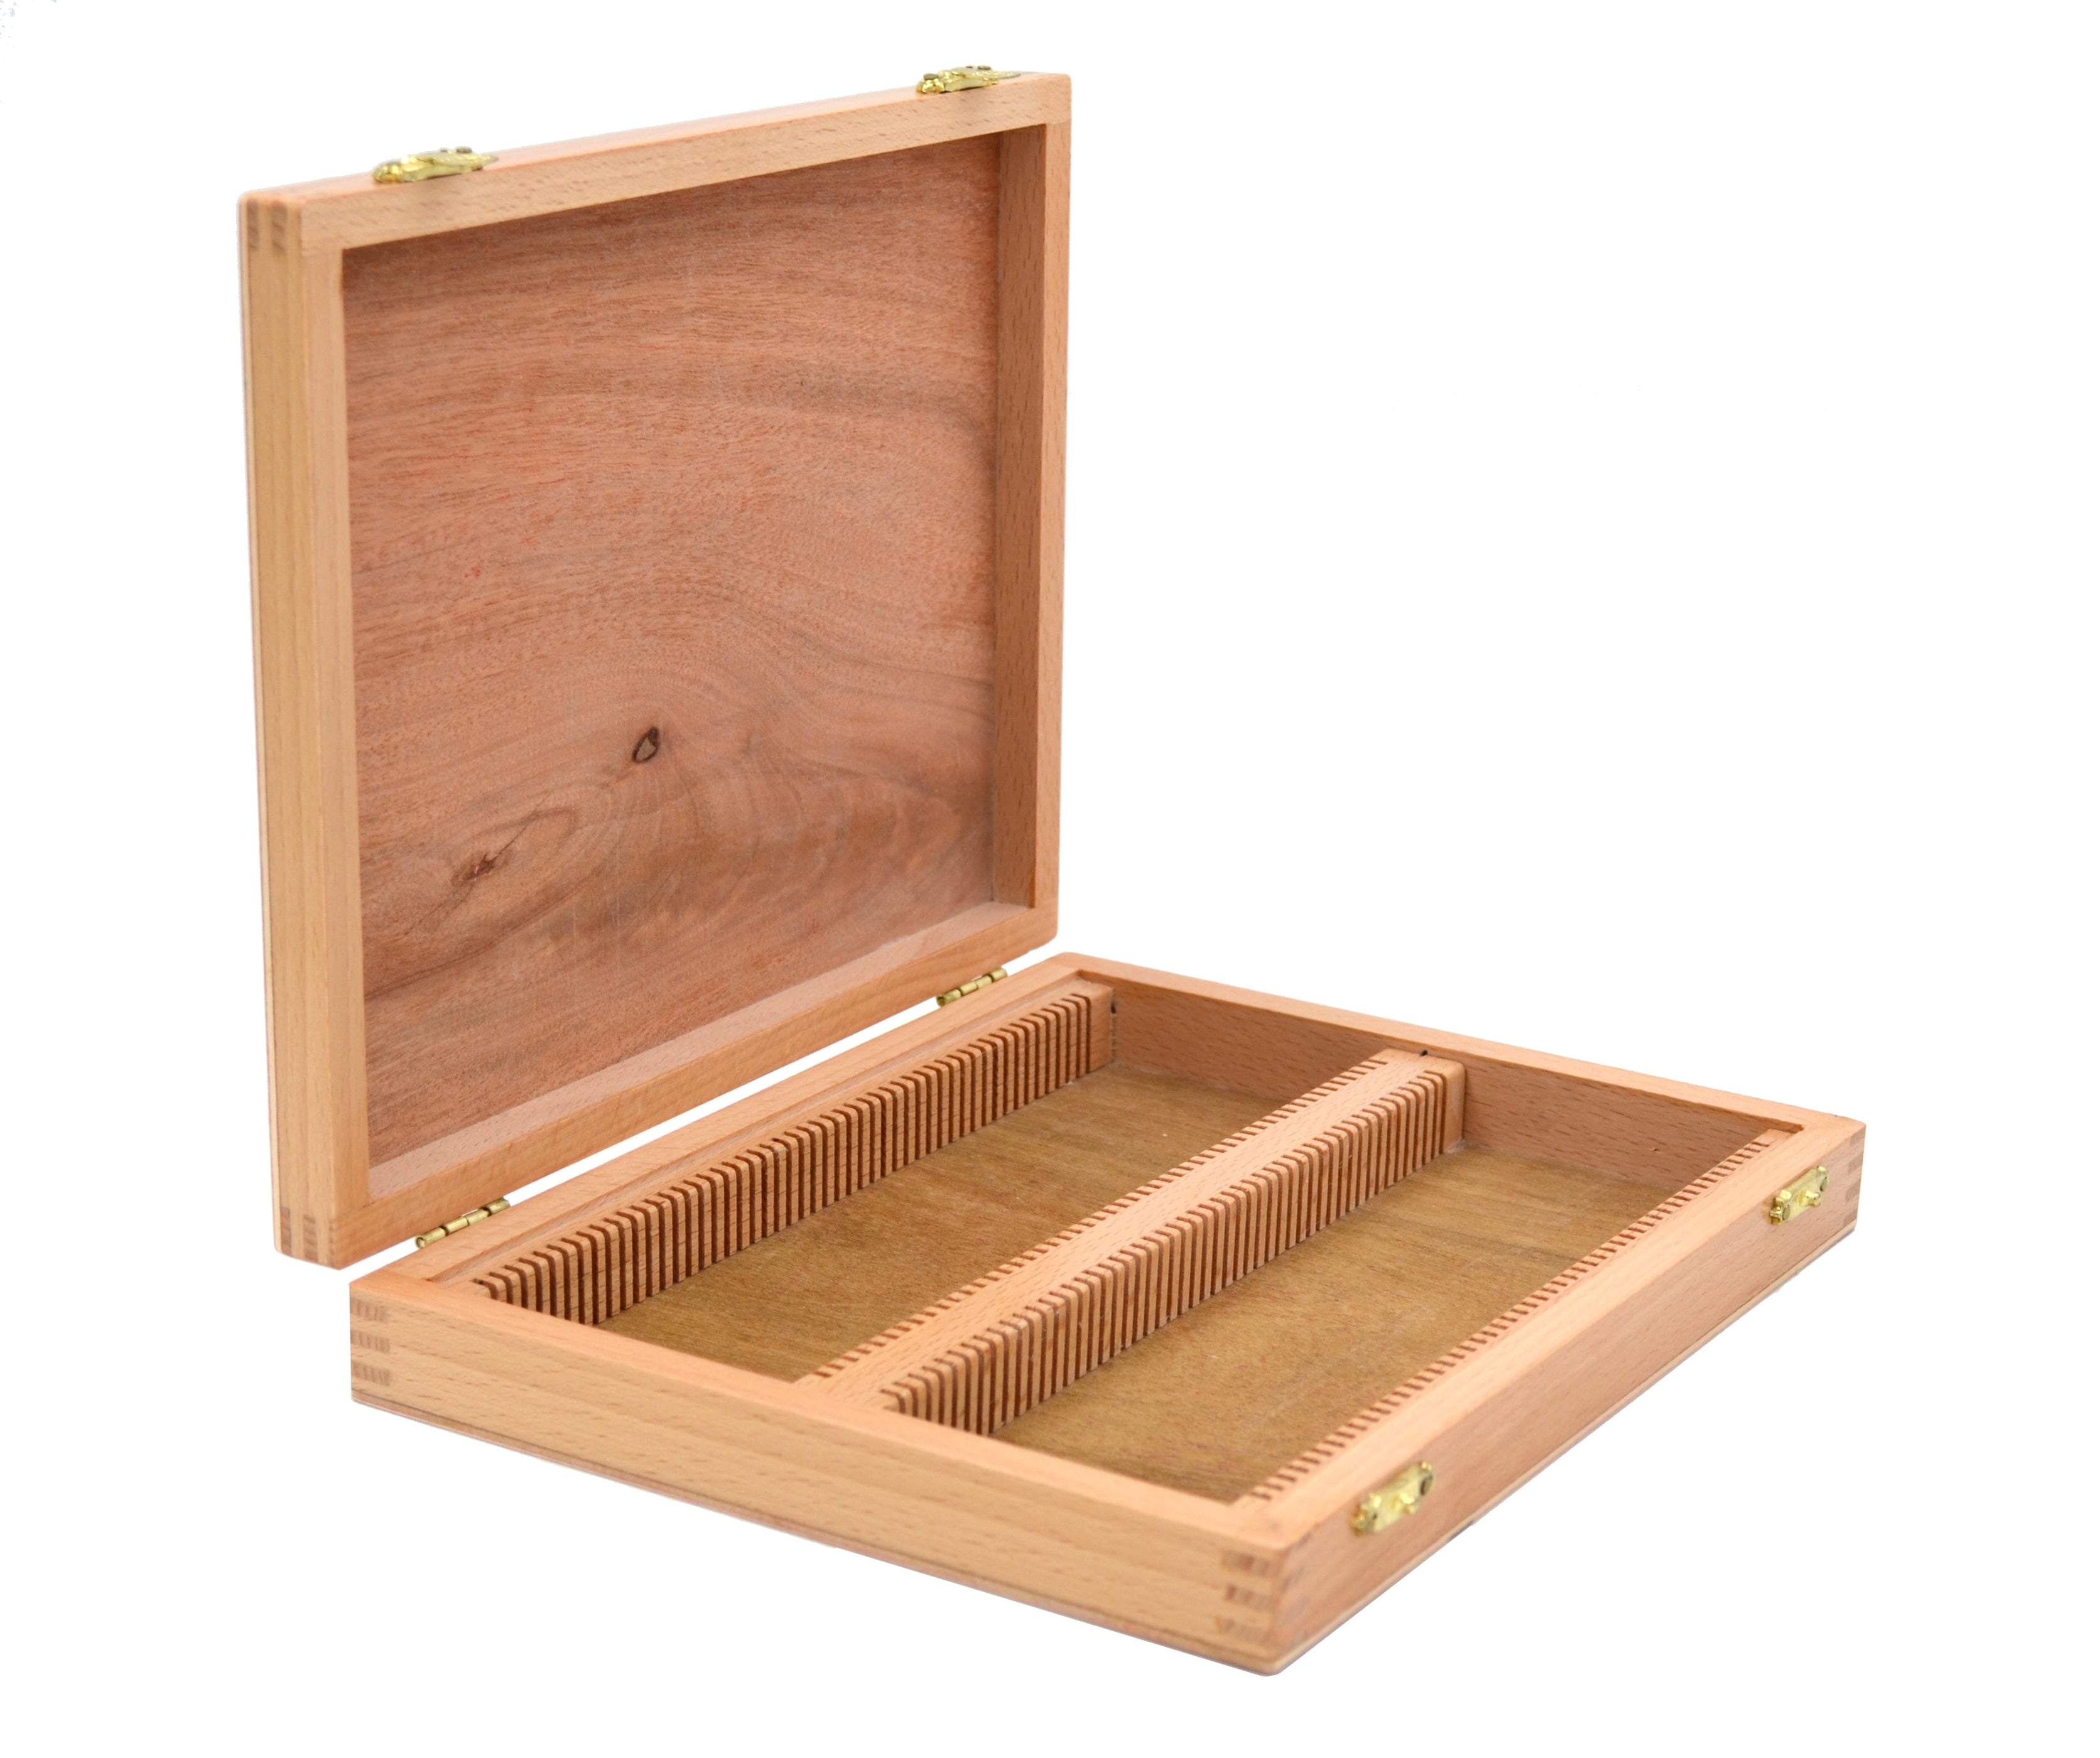 Wooden Slide Box for 100 slides, with Latches- Fits 75x25mm Slides - E ...